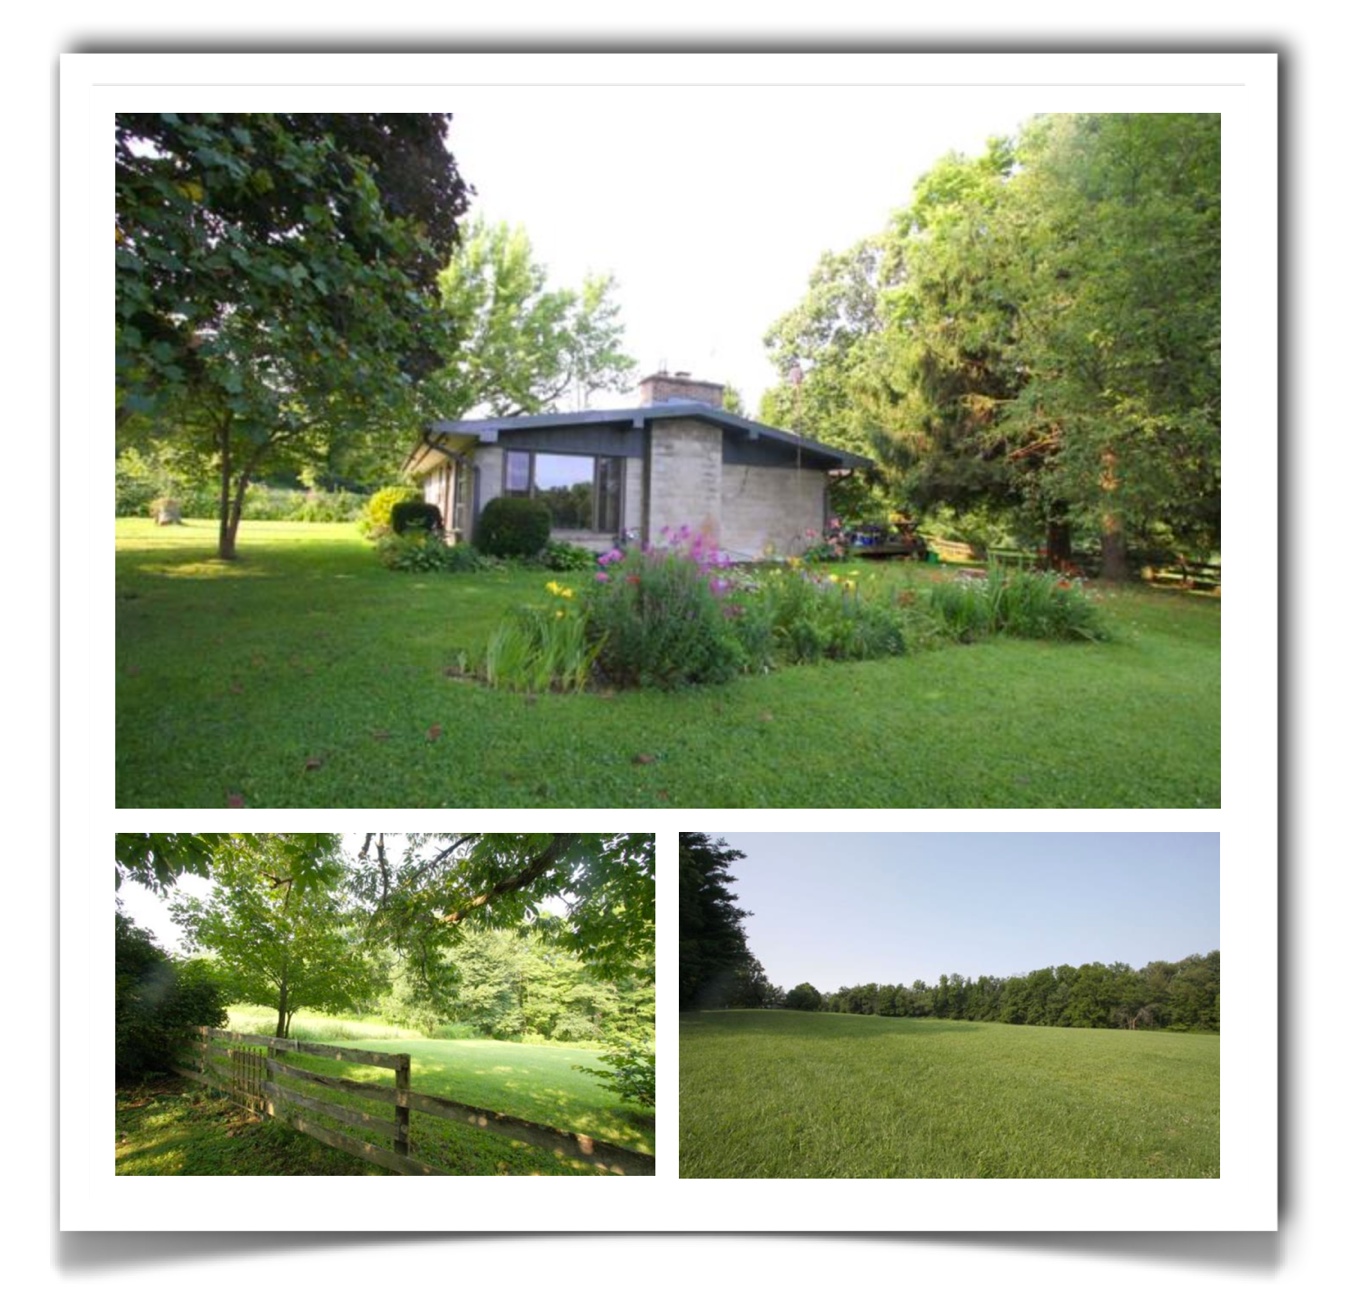 Acreage in Gambier Ohio and Kenyon College Area